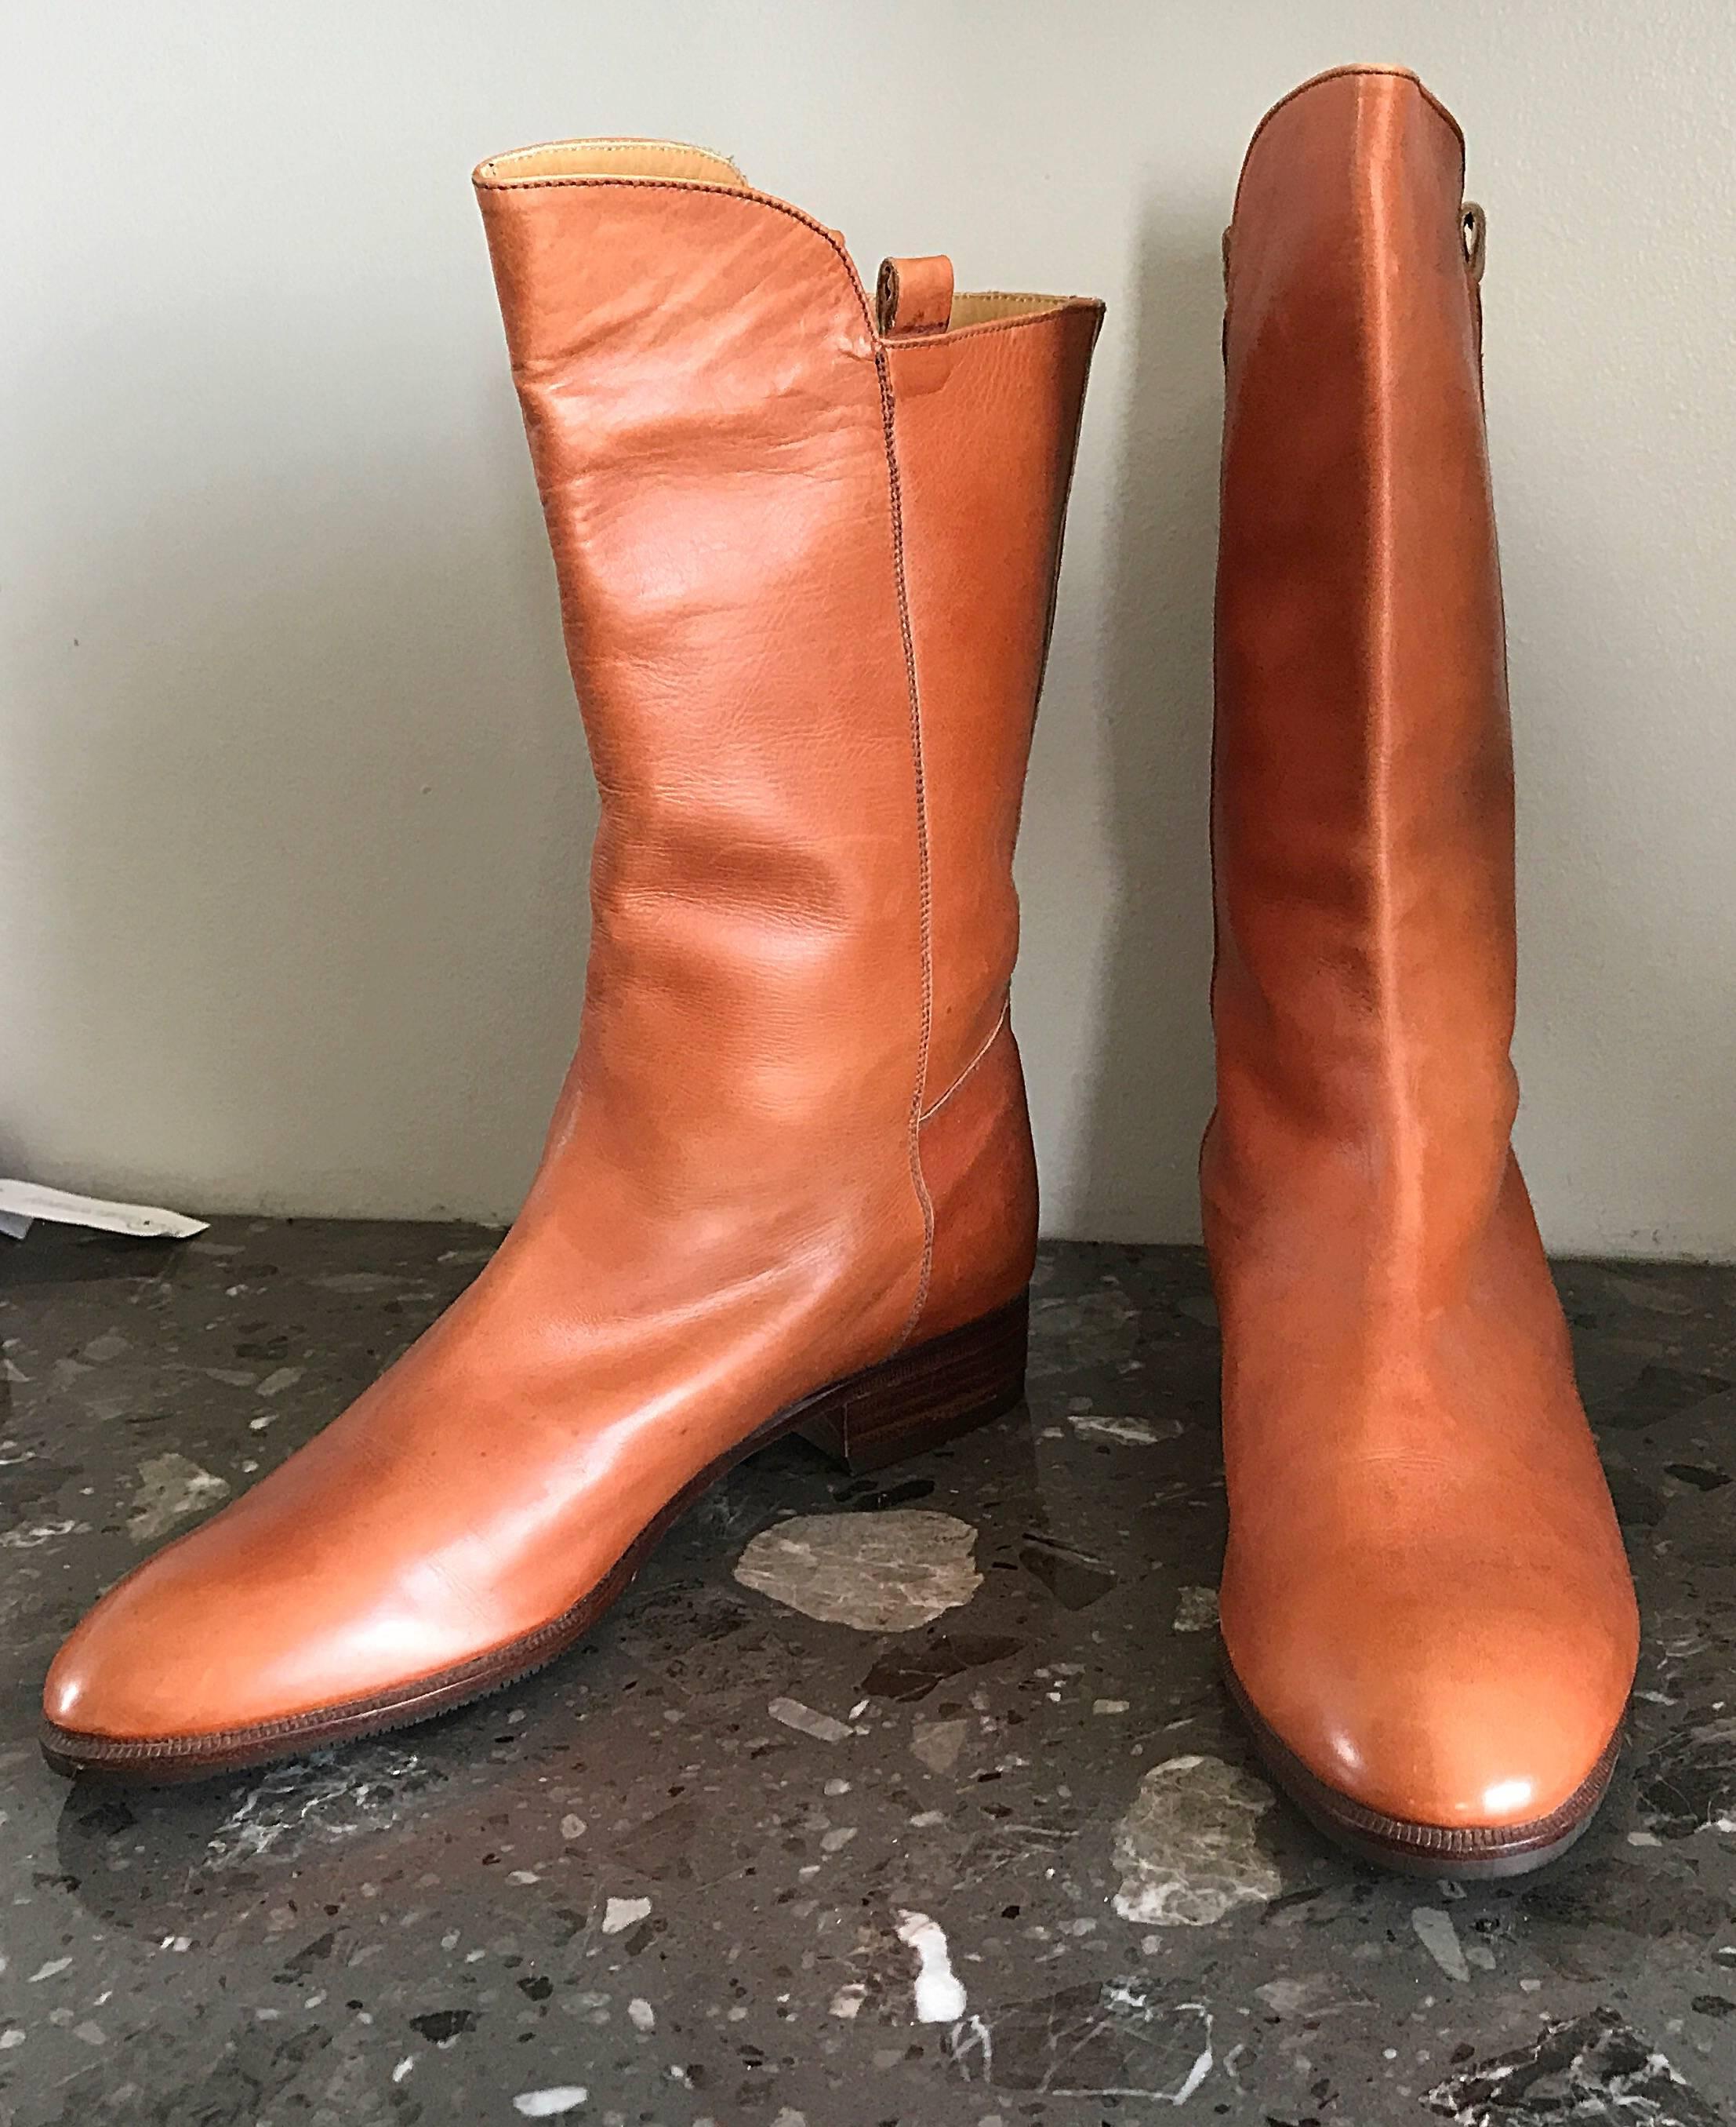 New never worn vintage 80s PERRY ELLIS tan cognac colored size 6 calf length leather boots! Saddle color literally matches everything! Simply slips on, and features leather soles. Adds a pop of color to a simple black outfit. Can easily be dressed